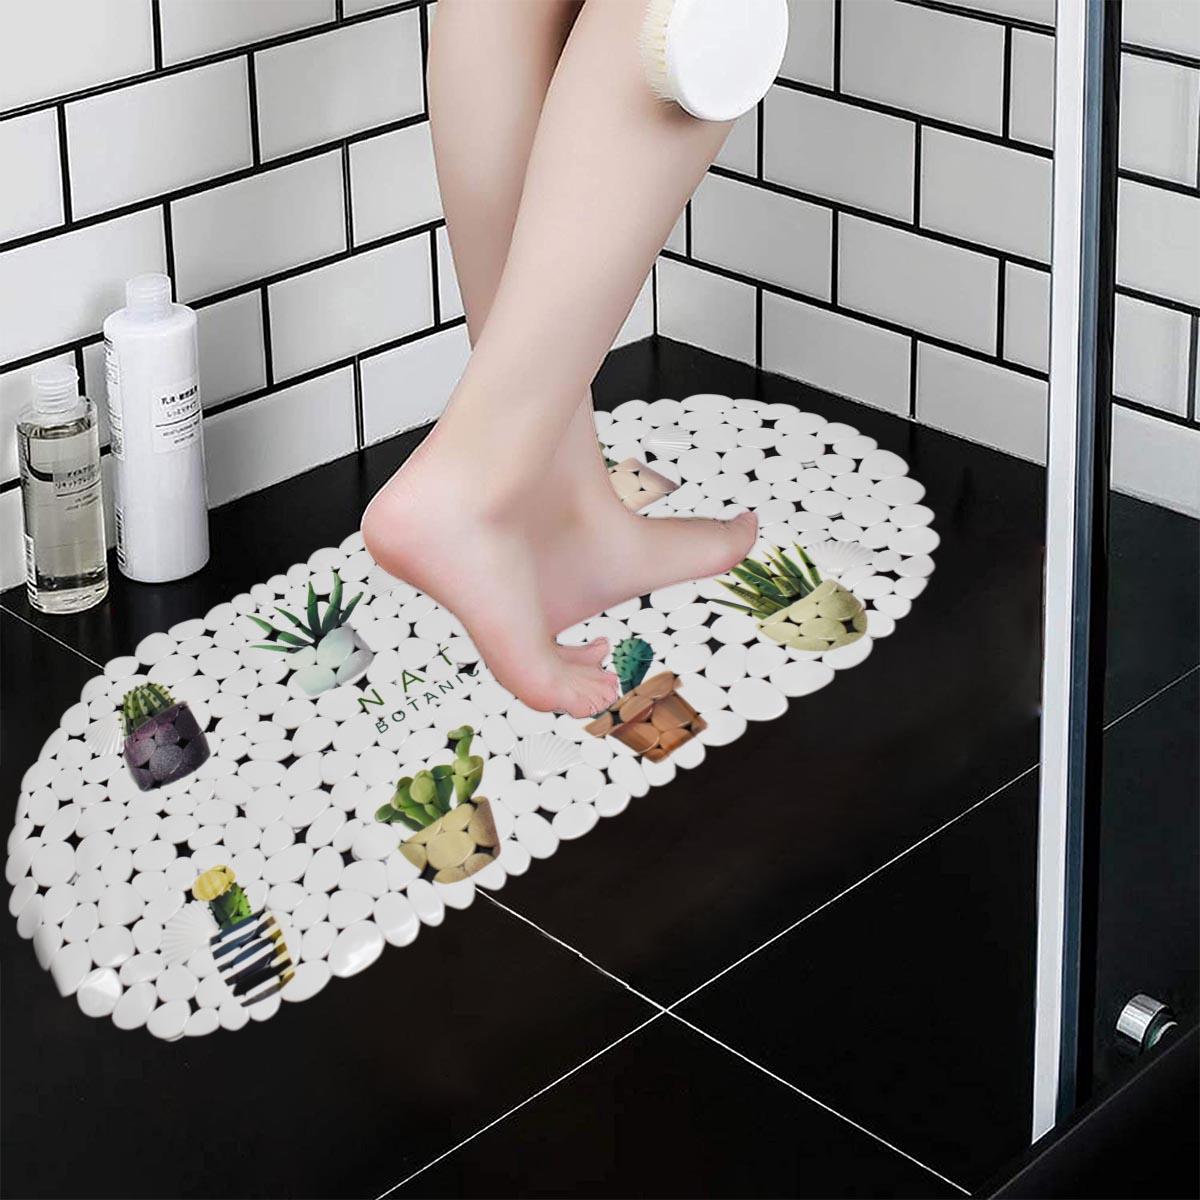 Kookee PVC Bath Mat Non-Slip Pebble Bathtub Mat L=69cm x W=35cm (for Smooth/Non-Textured Tubs Only) Safe Shower Mat with Drain Holes, Suction Cups for Bathroom (1108603)